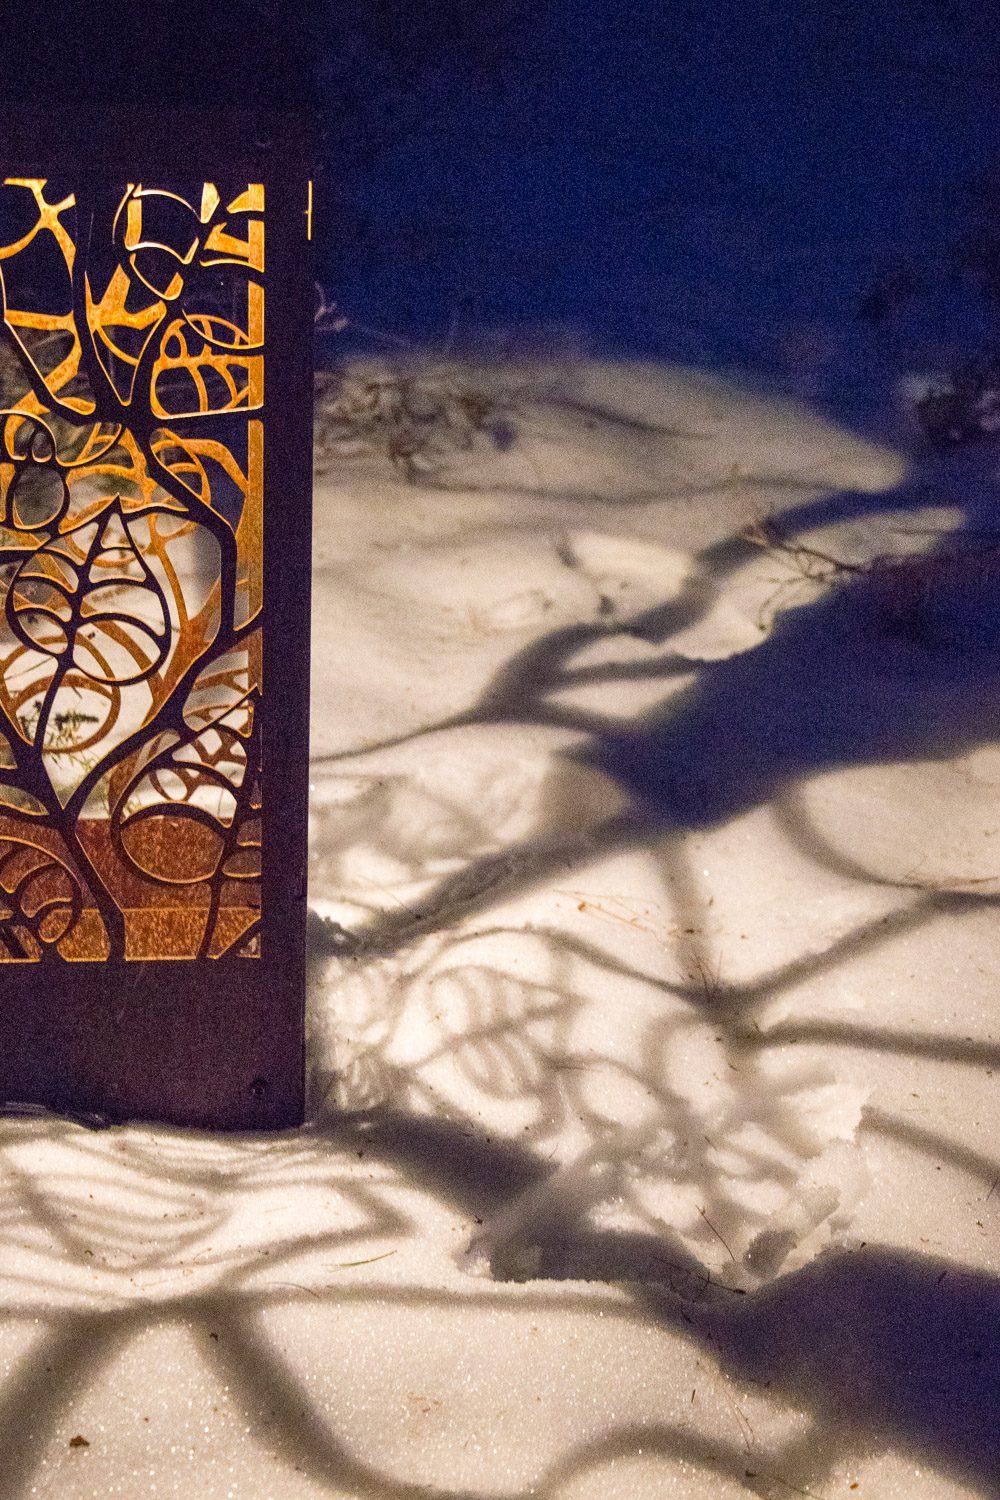 Cut metal garden light by RMI studios paints shadow images on the snow in the winter garden